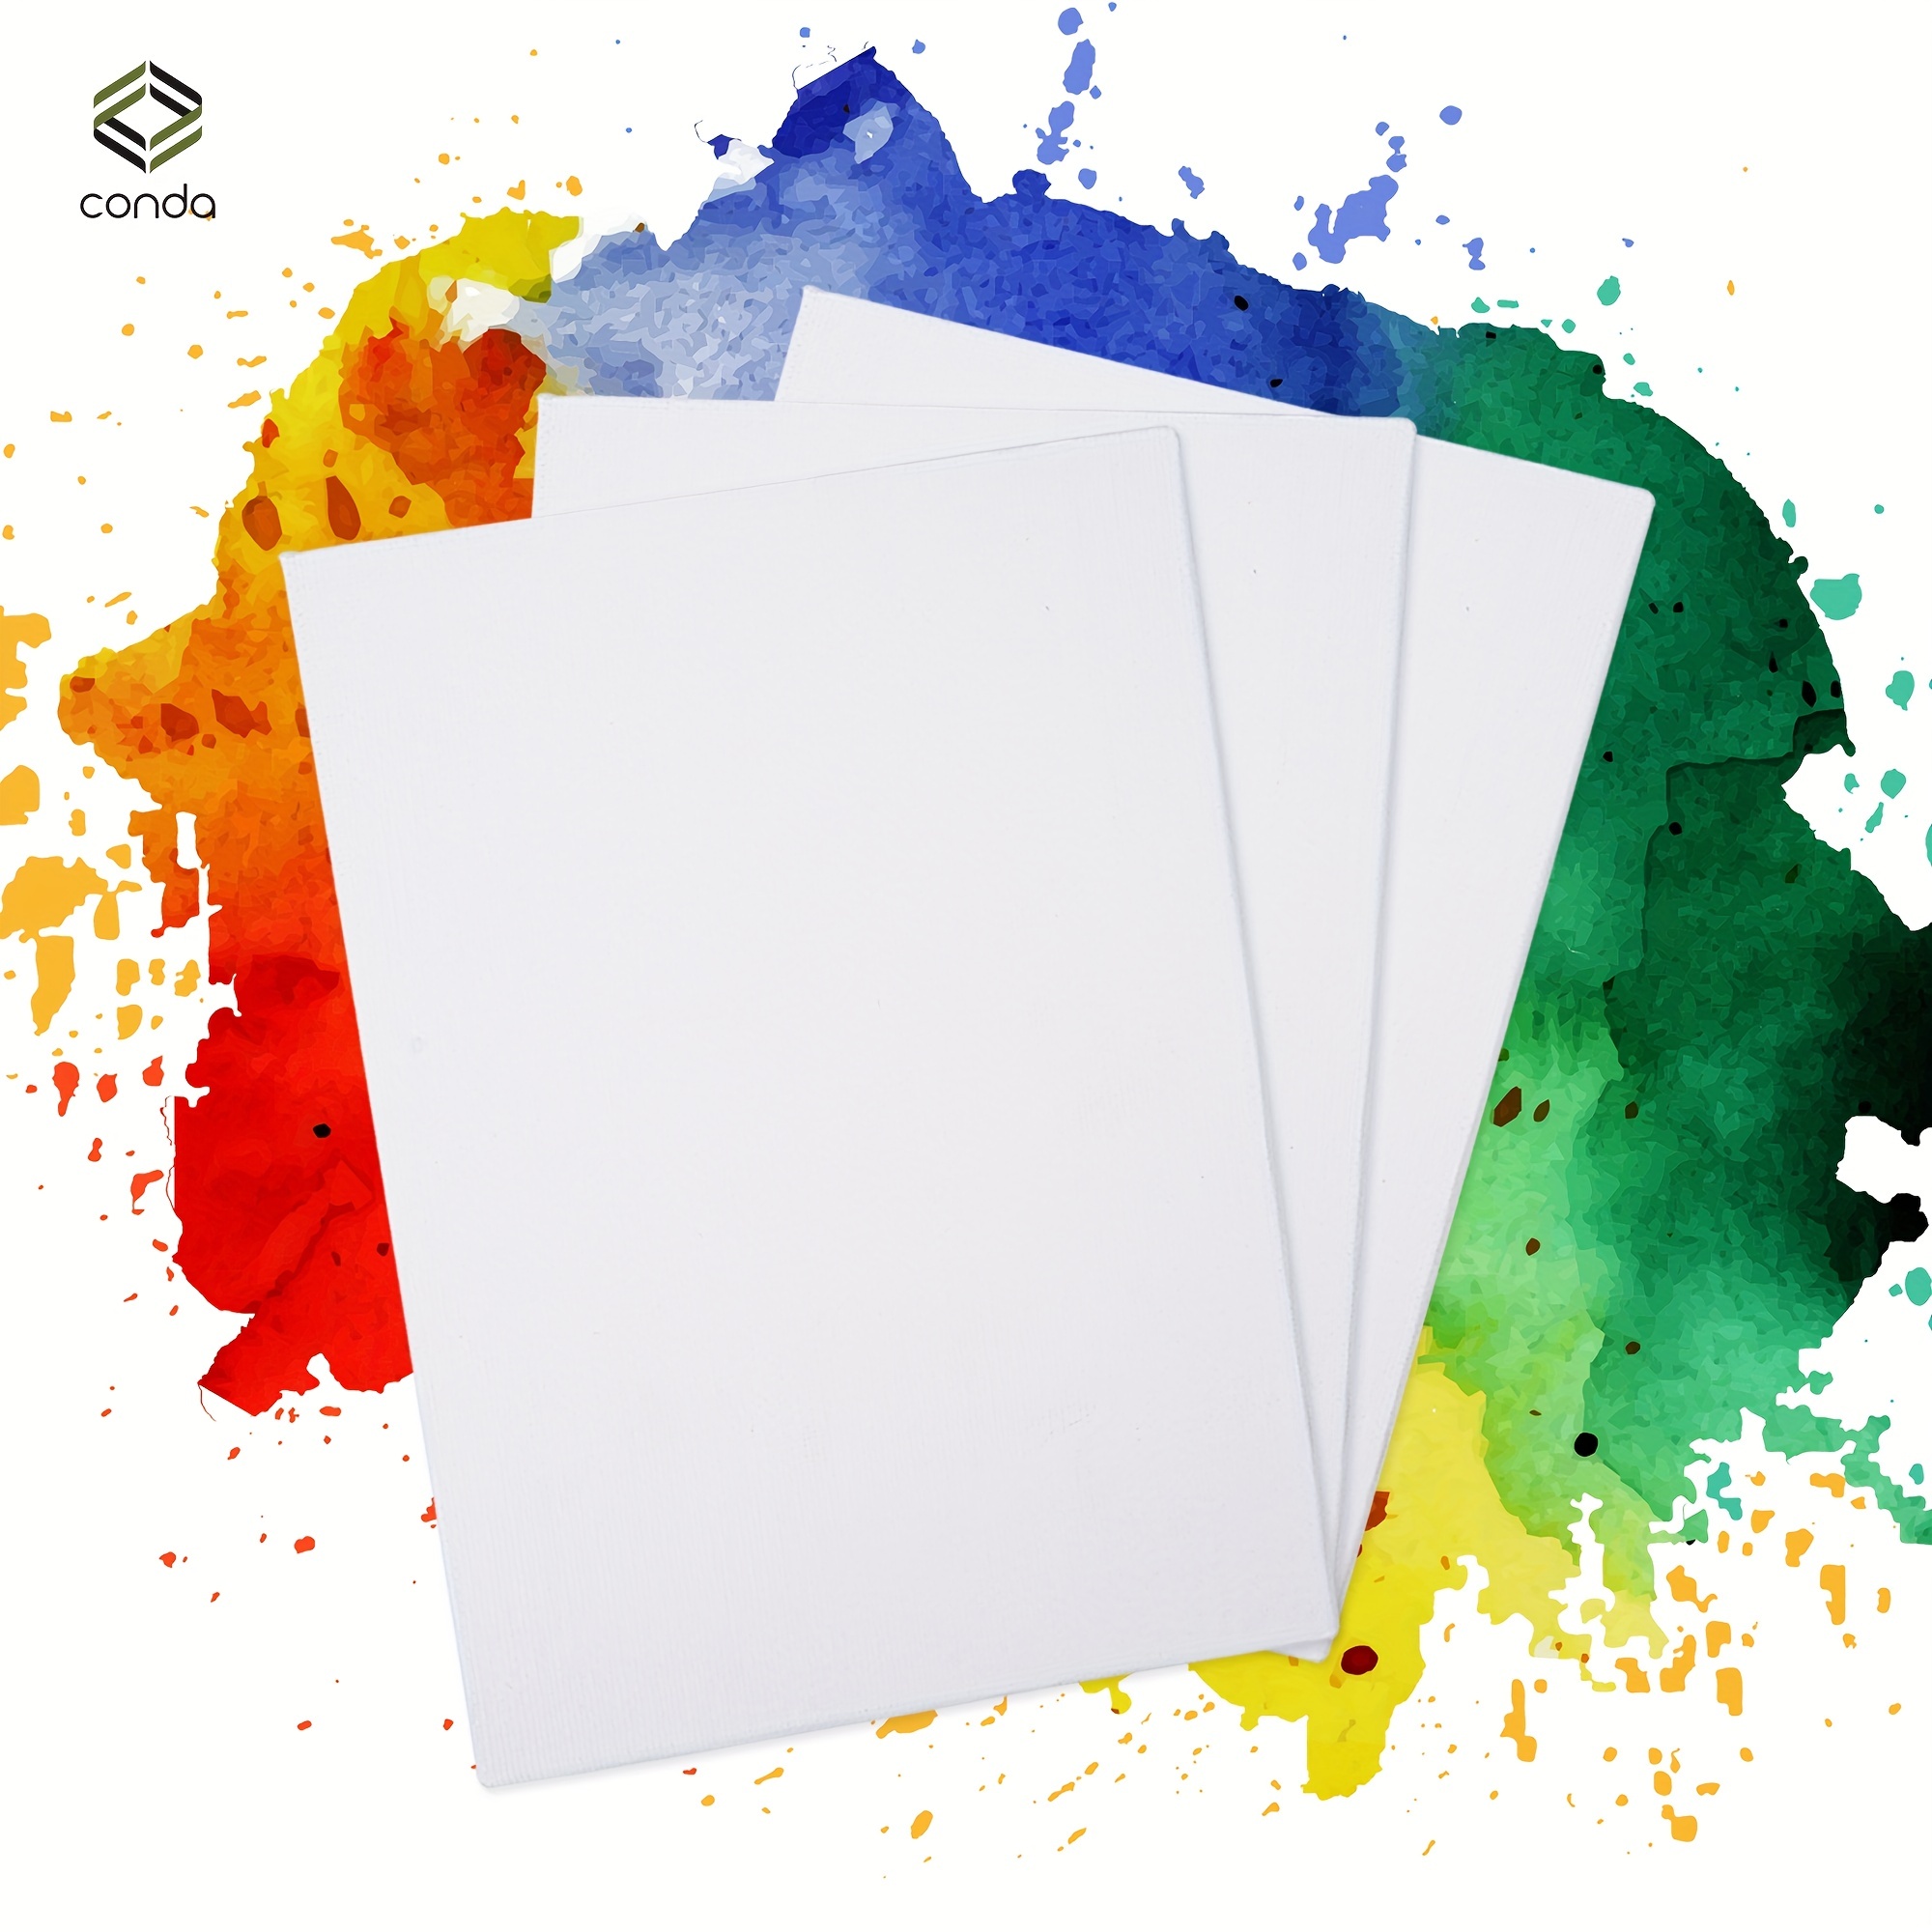 MEEDEN Canvases for Painting,5x7 Blank Paint Canvas Panels 15-Pack,100% Cotton White Art Canvas Boards,8 oz Gesso-Primed Artist Acid-Free Canvas